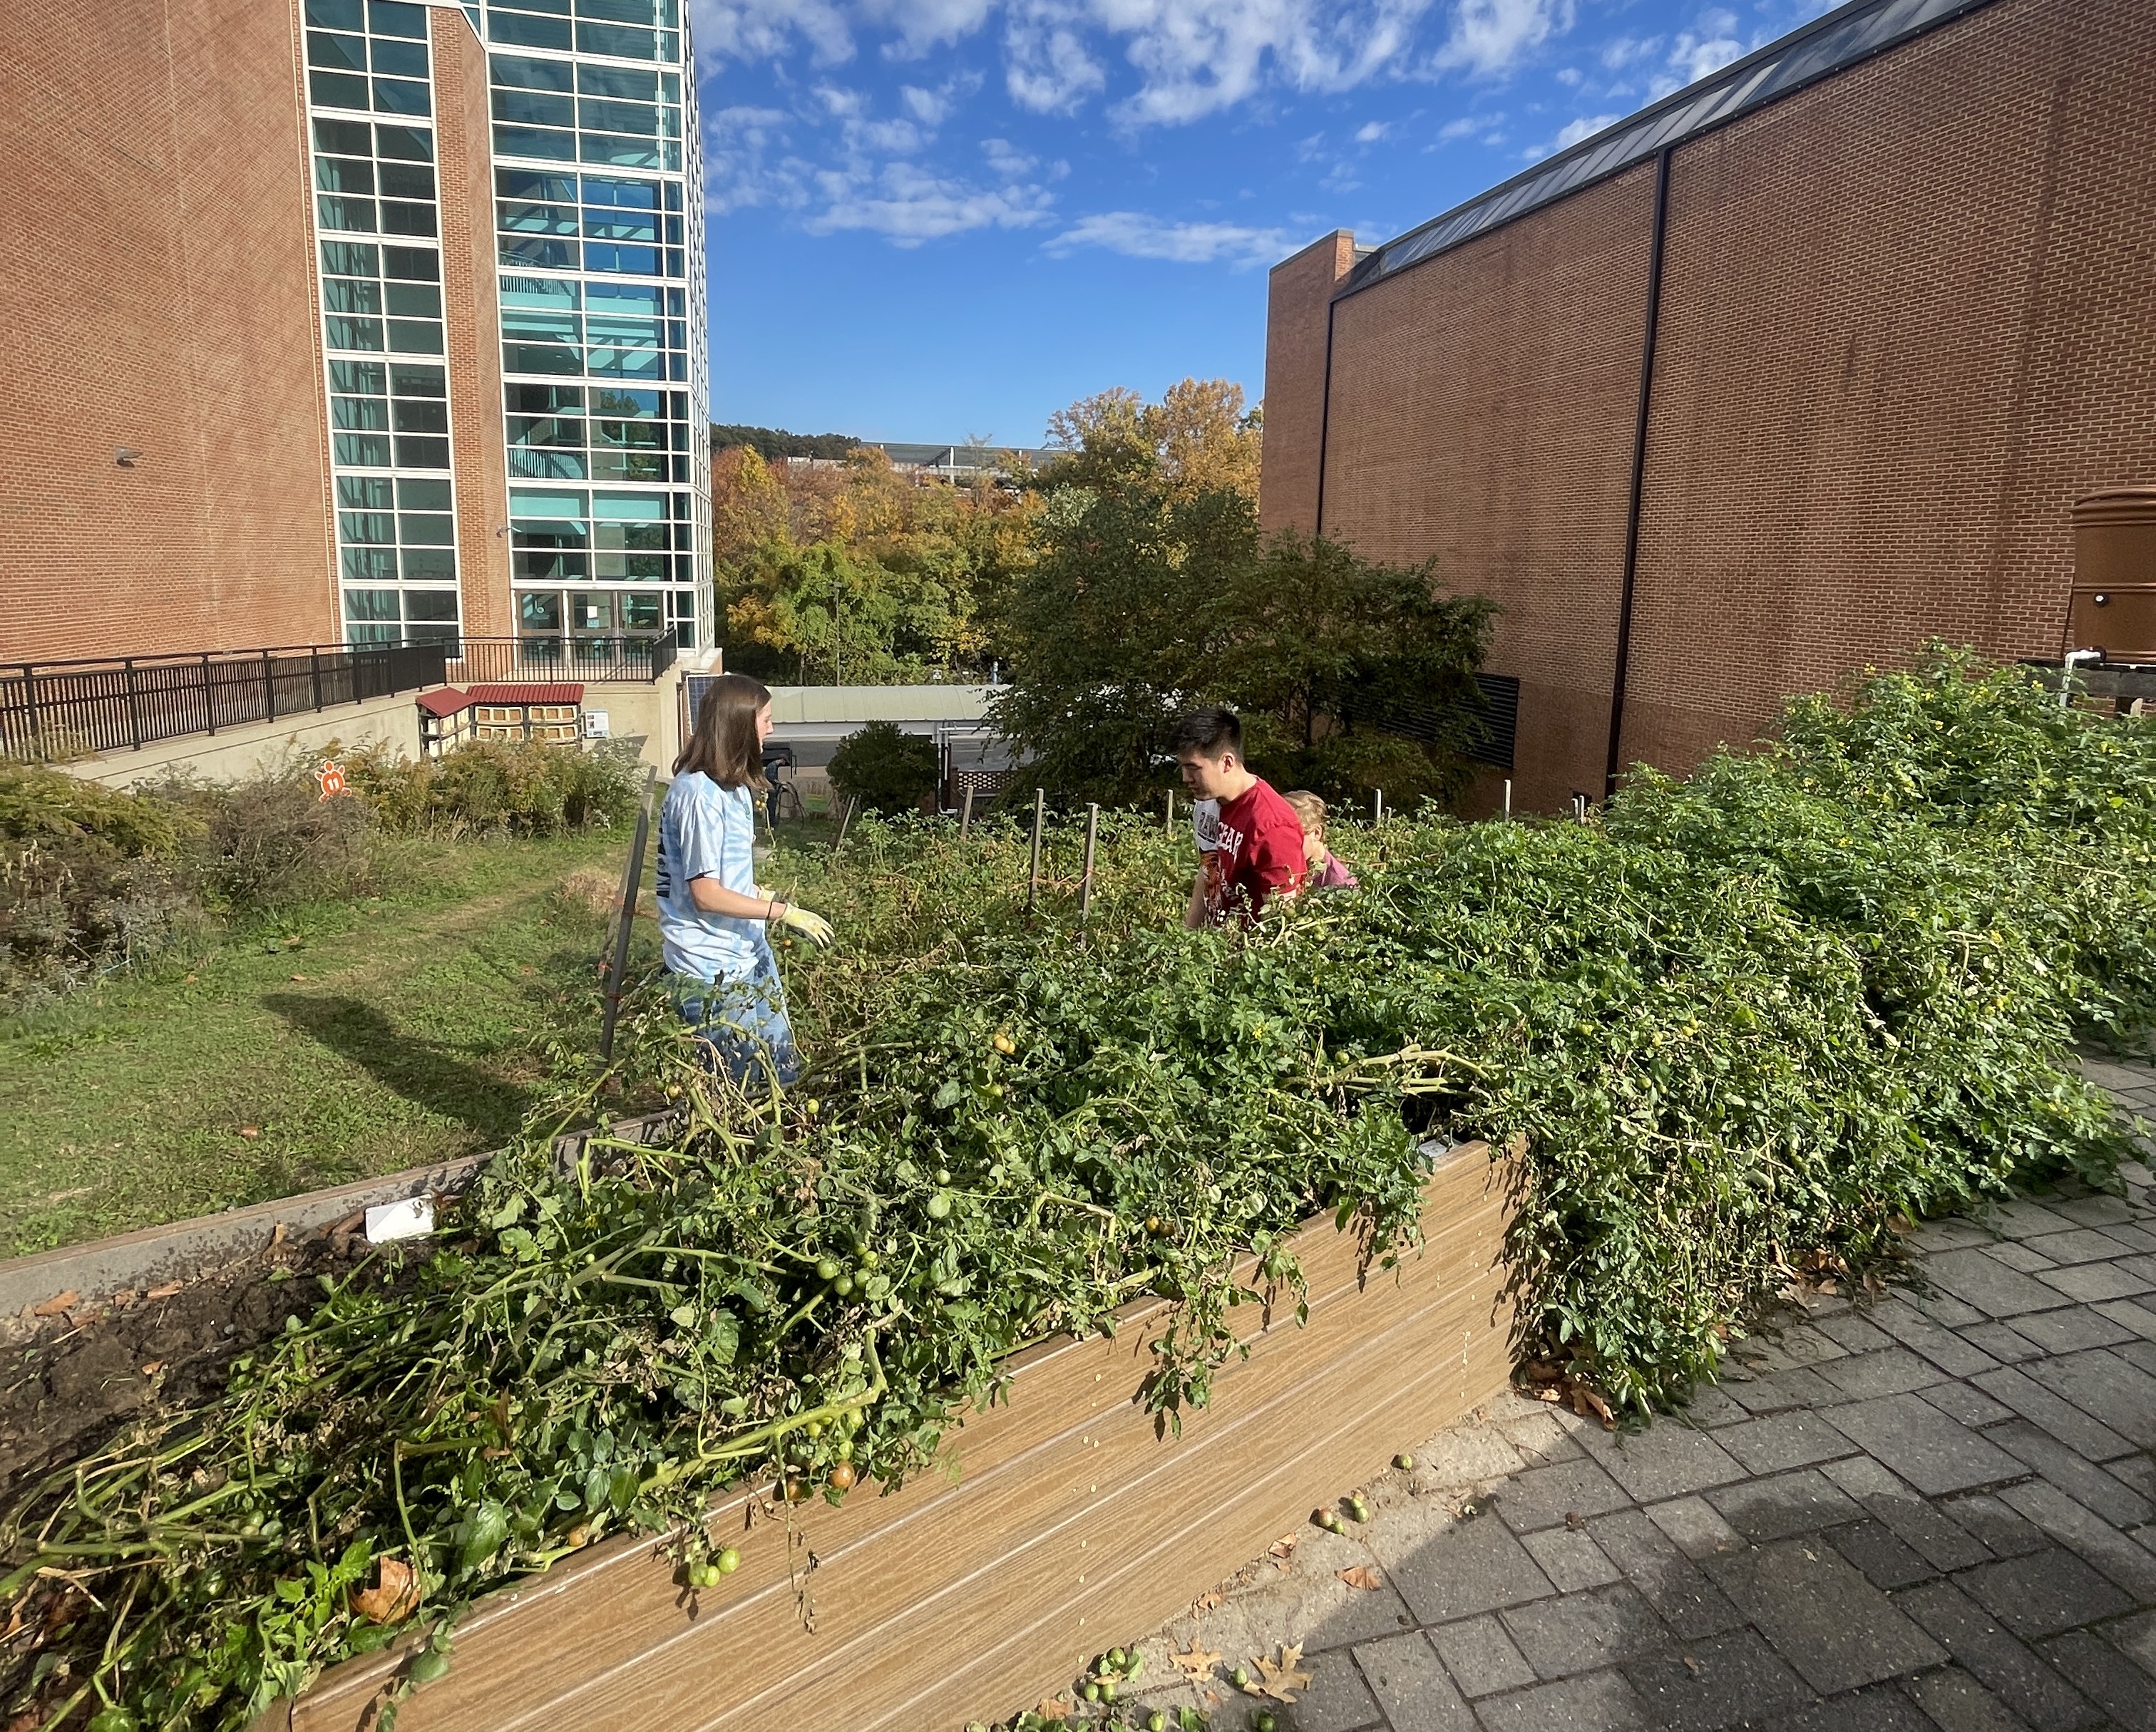 Students volunteering at the Community Learning Garden